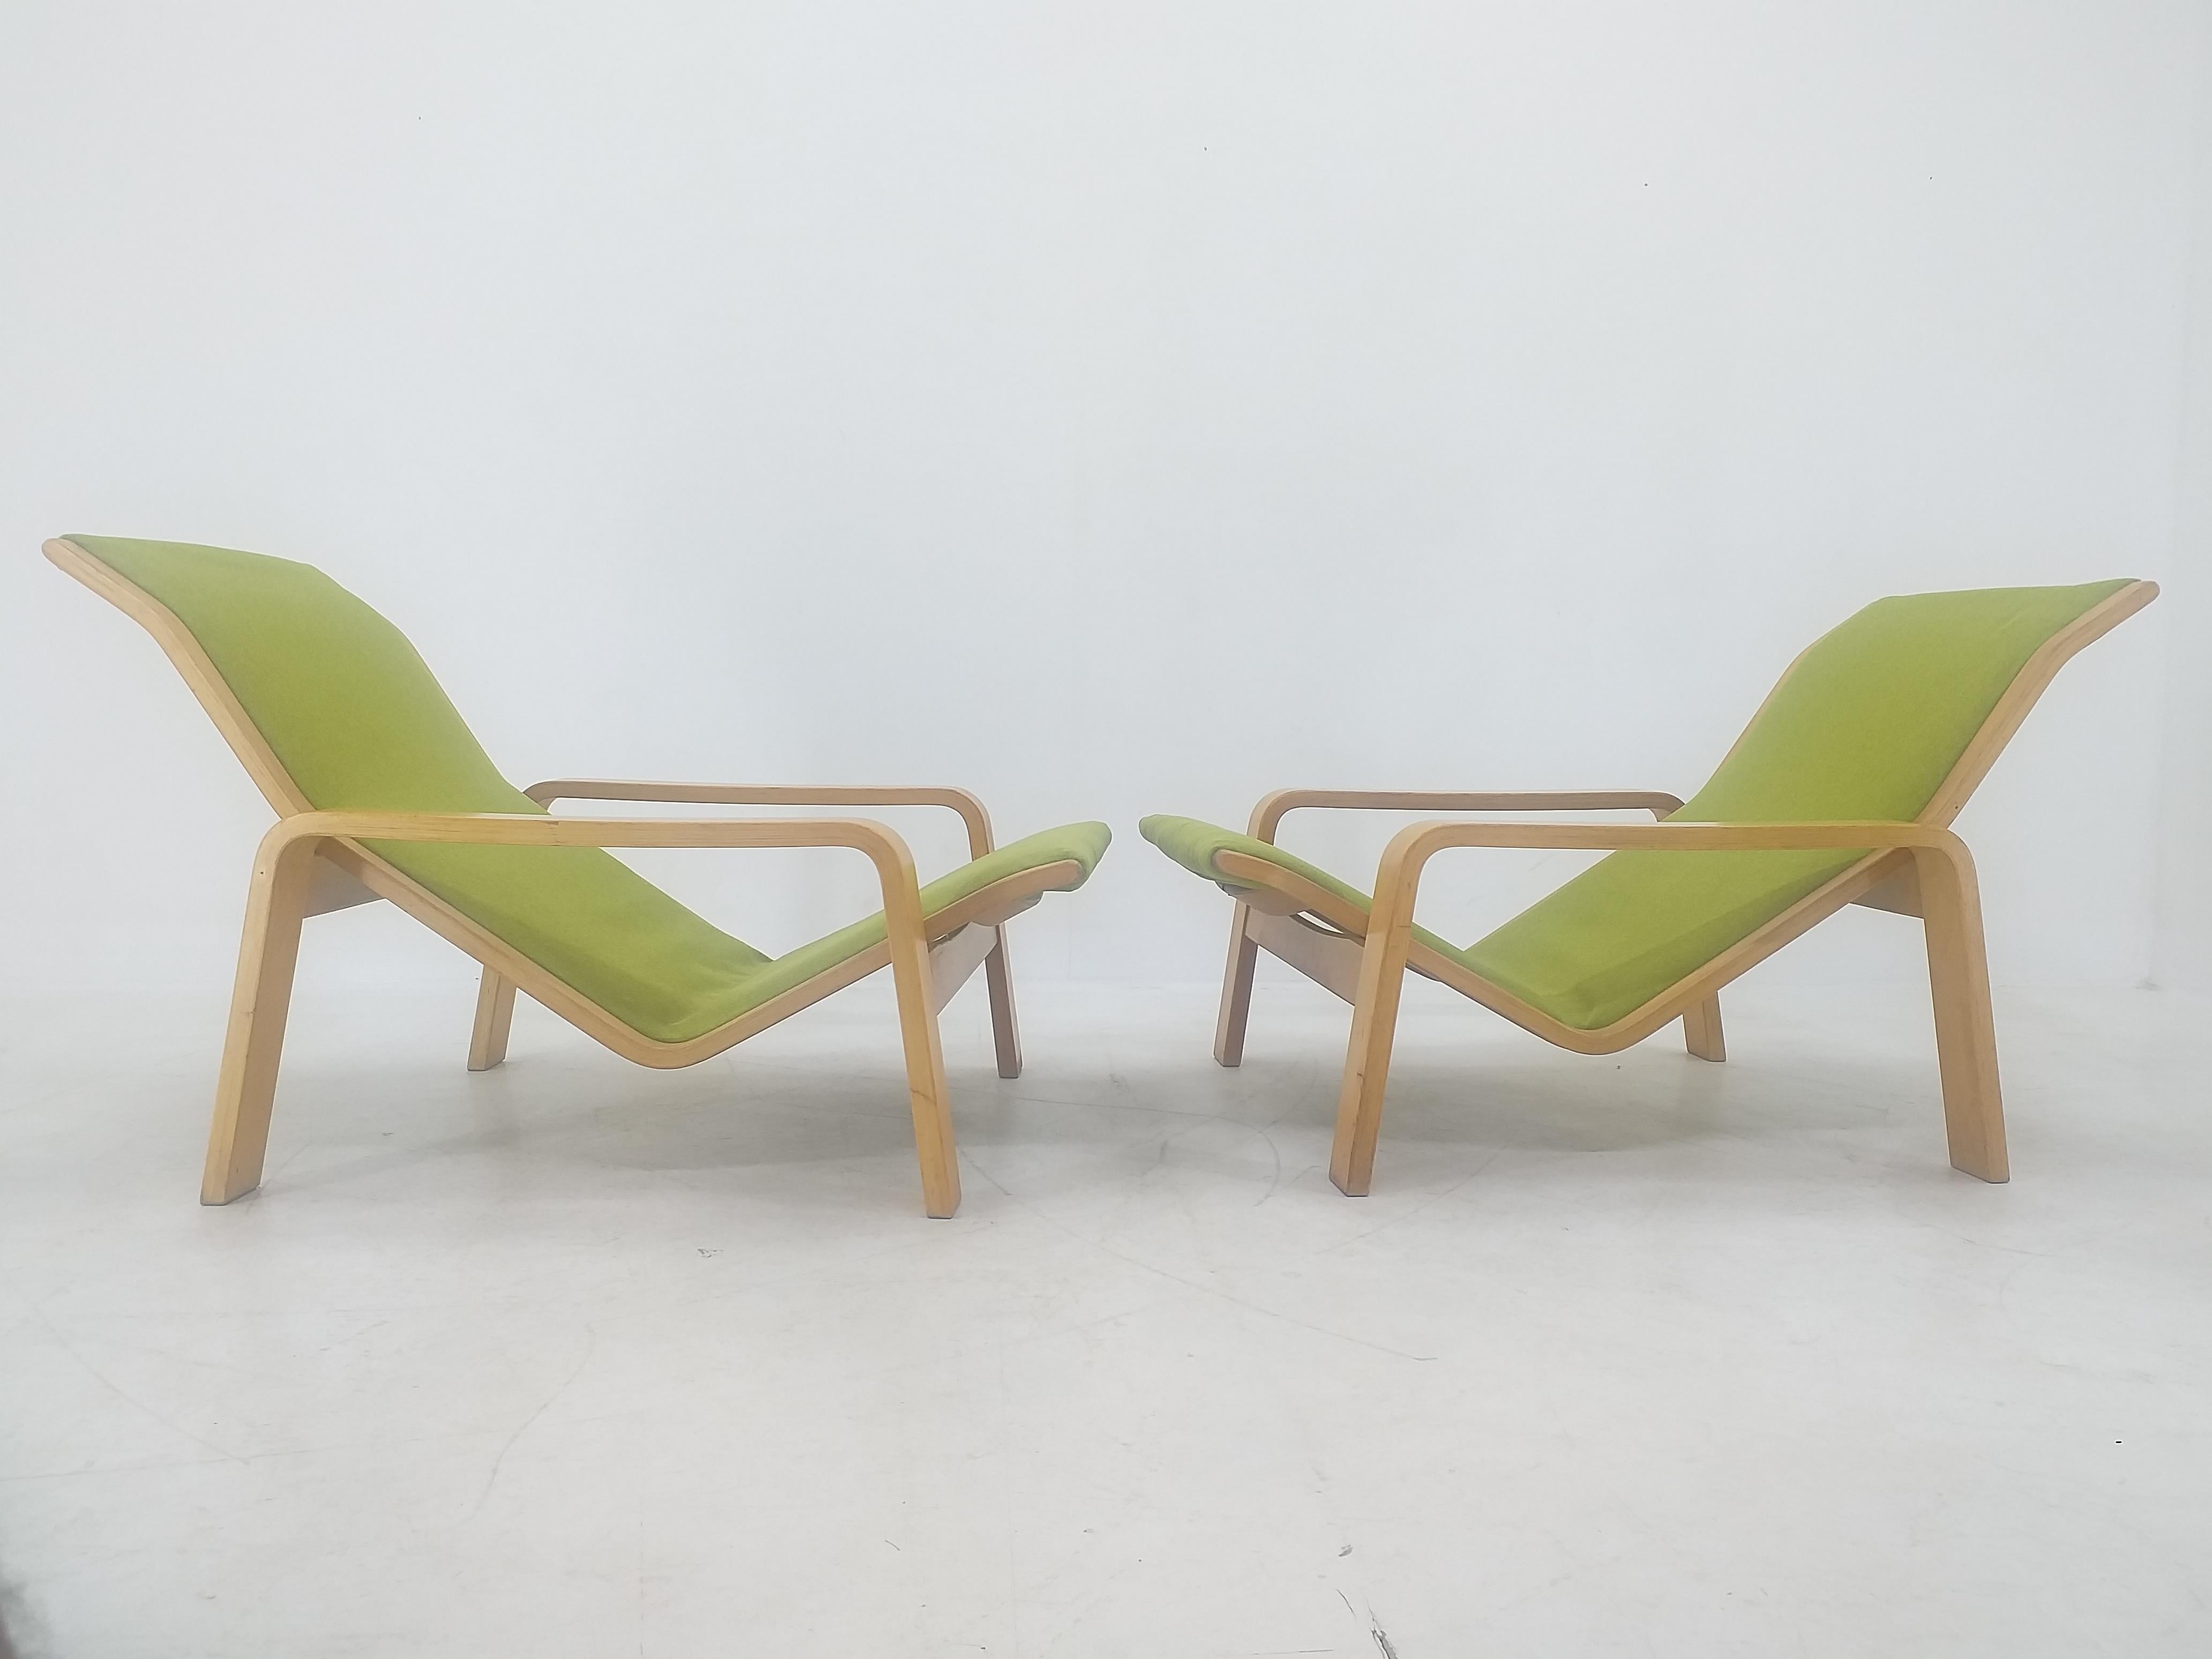 Pair of Lounge Chairs Pulkka, Ilmari Lappalainen for ASKO, Finland, 1970s For Sale 4